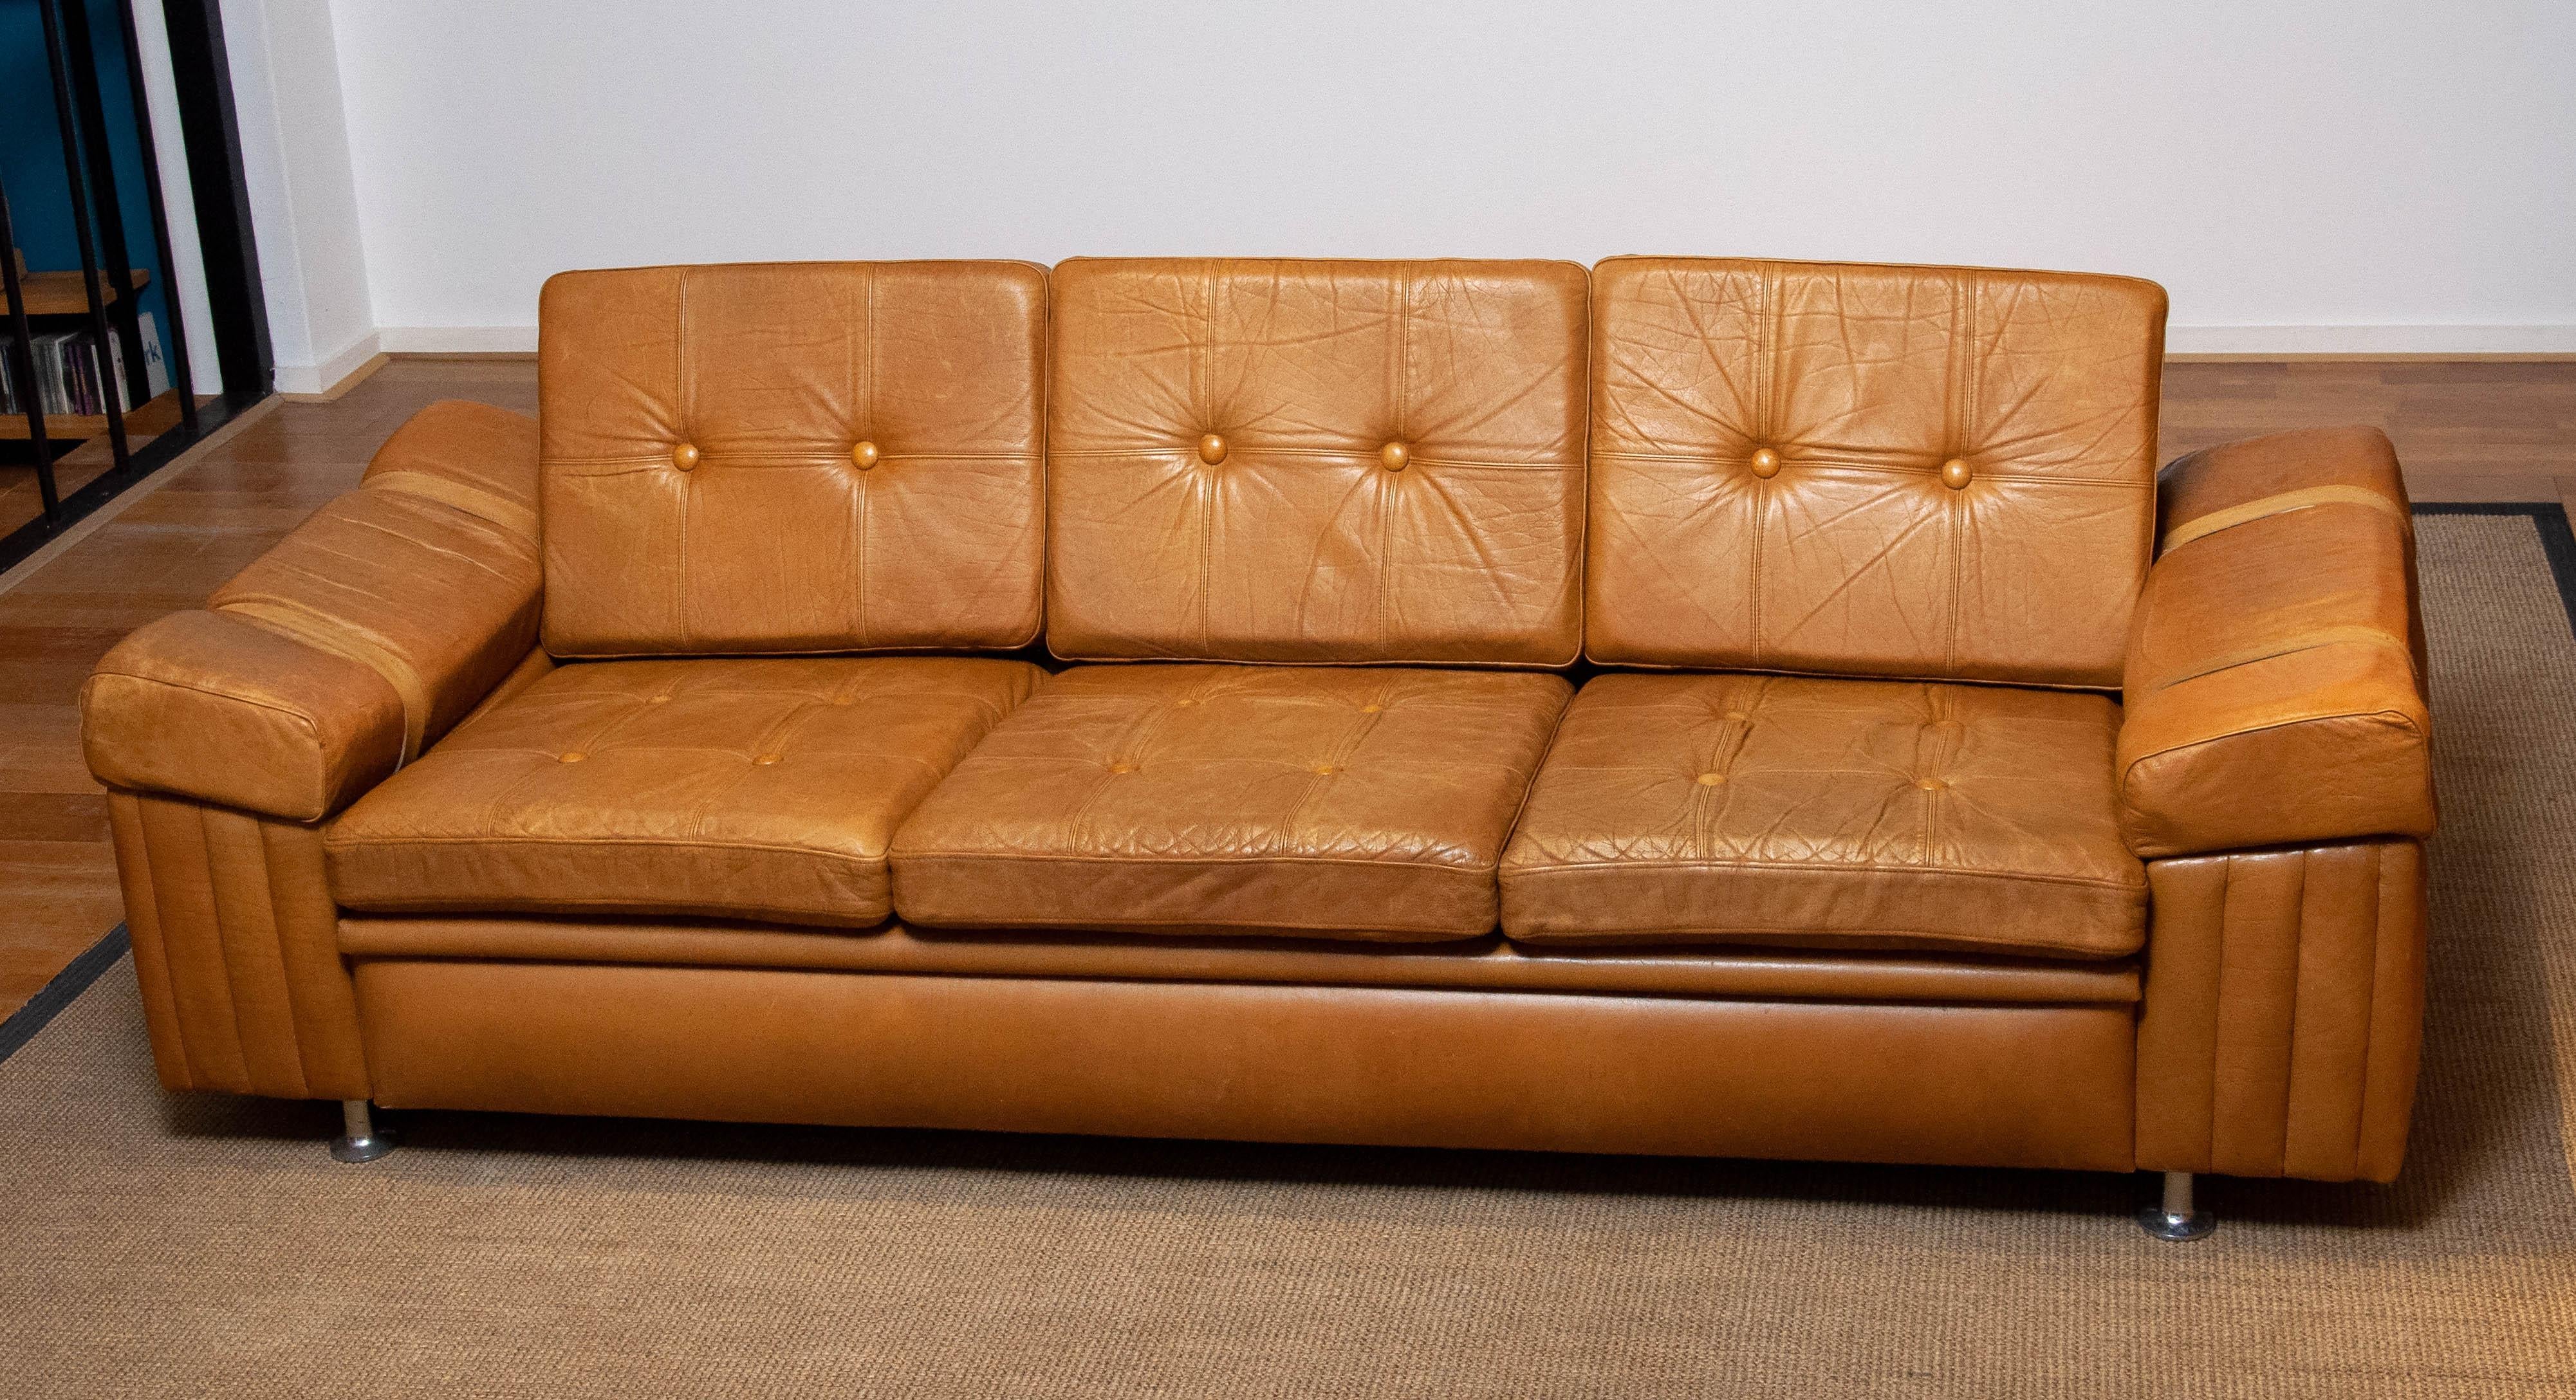 1970s Scandinavian Brutalist Three-Seater Low-Back Sofa in Camel Colored Leather For Sale 5